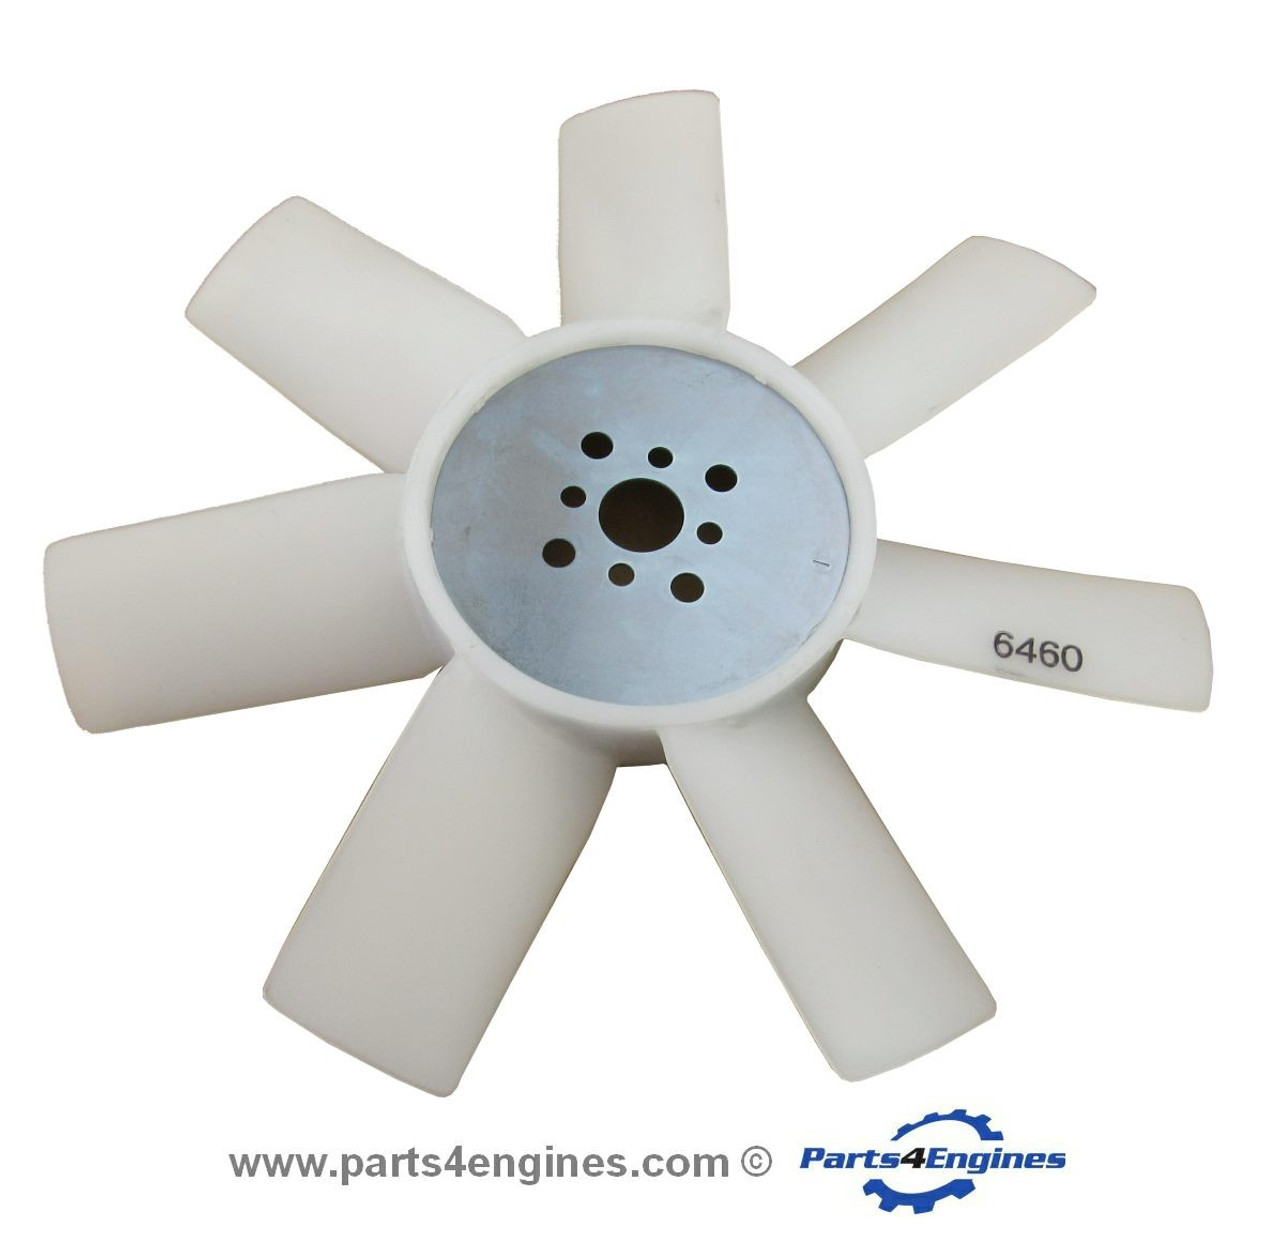 Perkins 403J-11 Engine cooling fan, from parts4engines.com